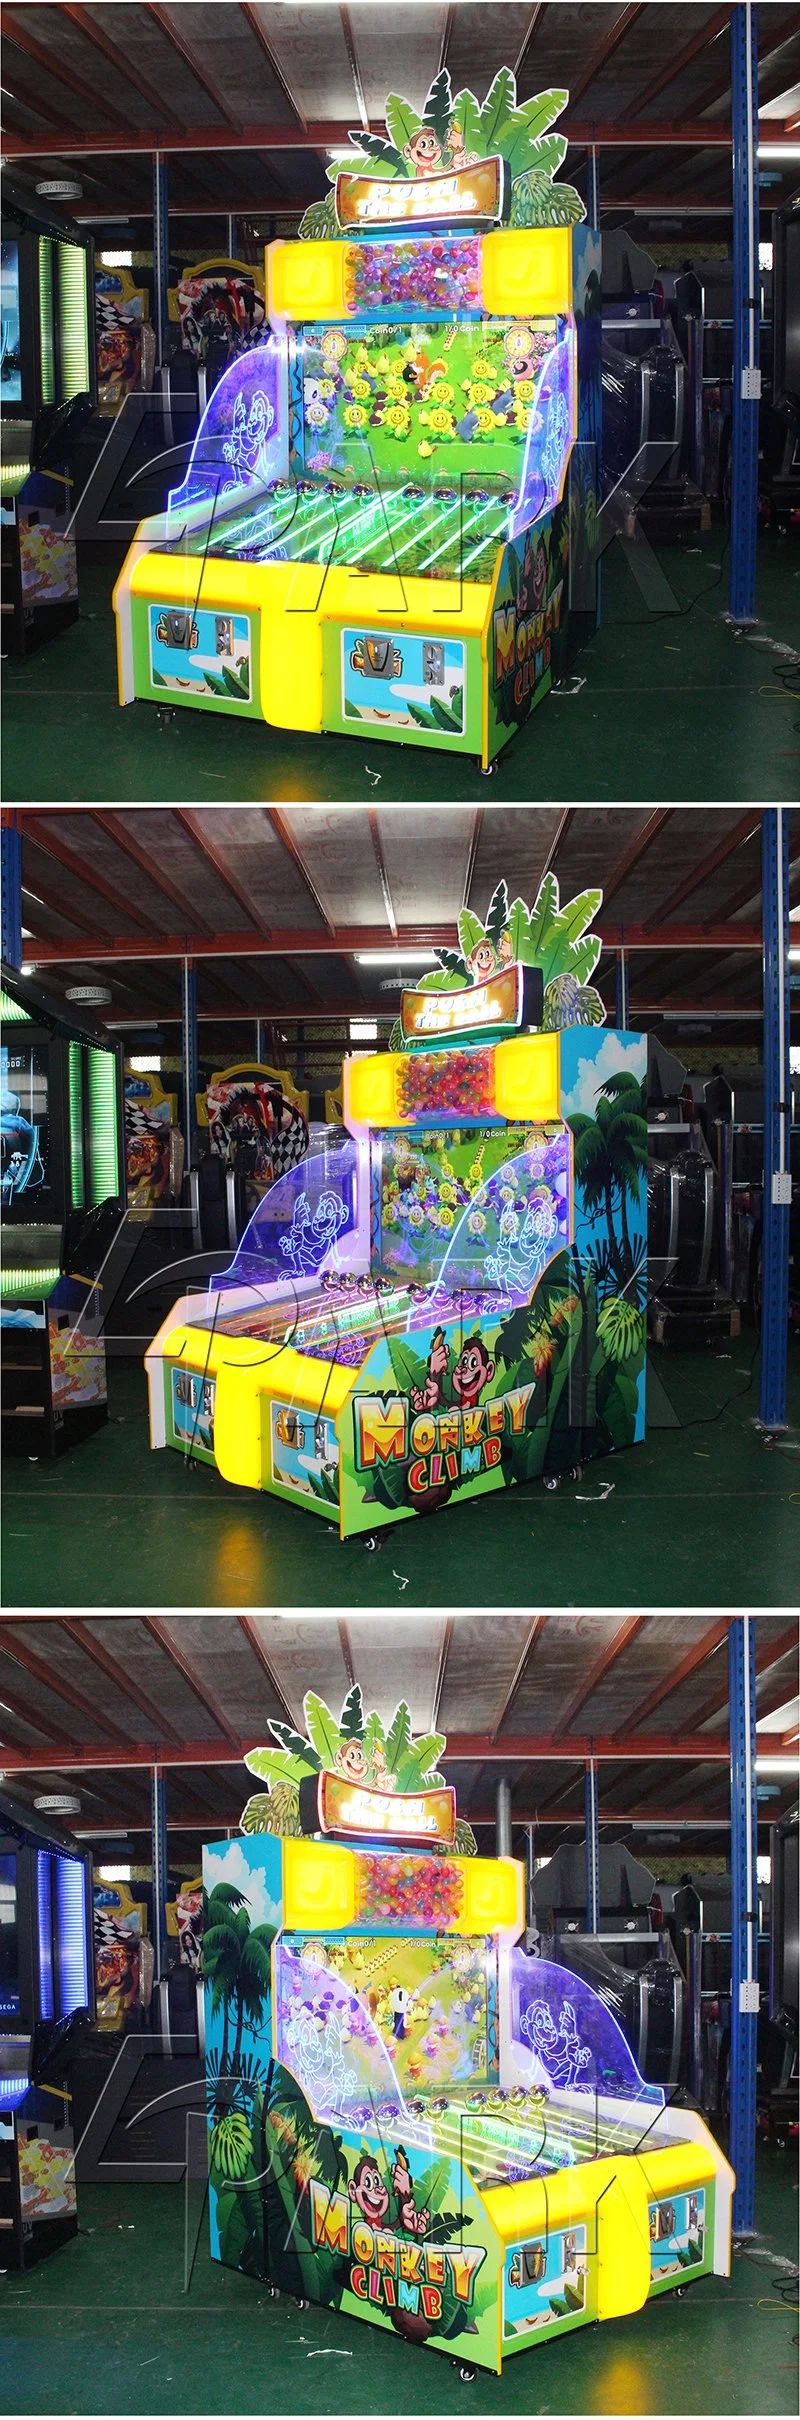 Indoor Games Hitting The Screen Kids Pushing Ball Video Games 2 Players Arcade Tickets for Sale